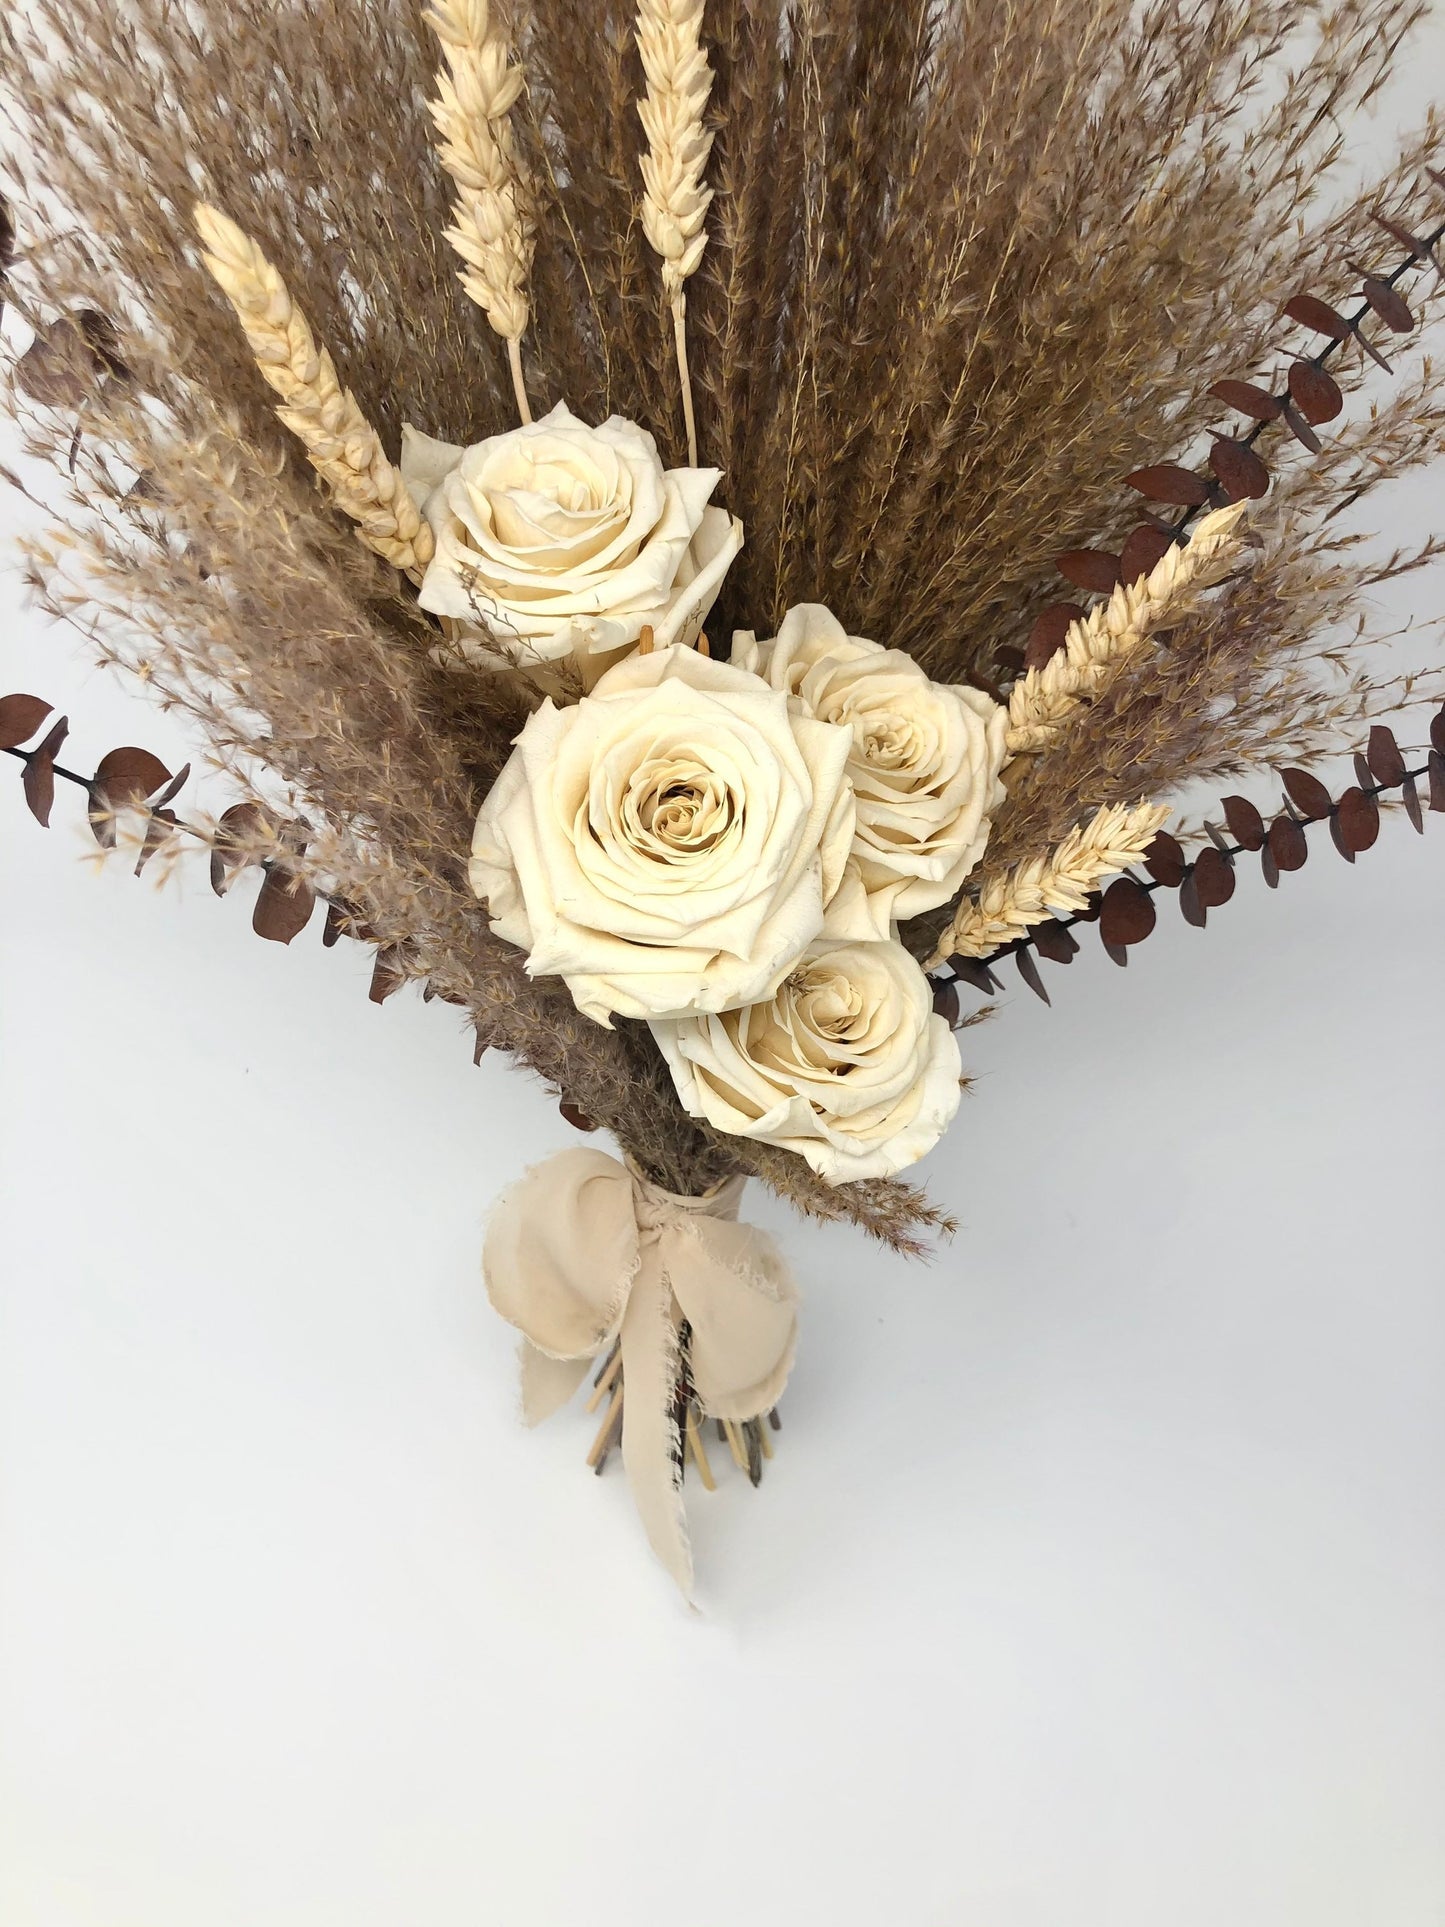 Off White Wedding Bouquet, Preserved Forever Roses, Floral, Beige, Bridal, Fall, Pampas Grass, Ribbon, Wheat, Cream and Green, Neutral Dried